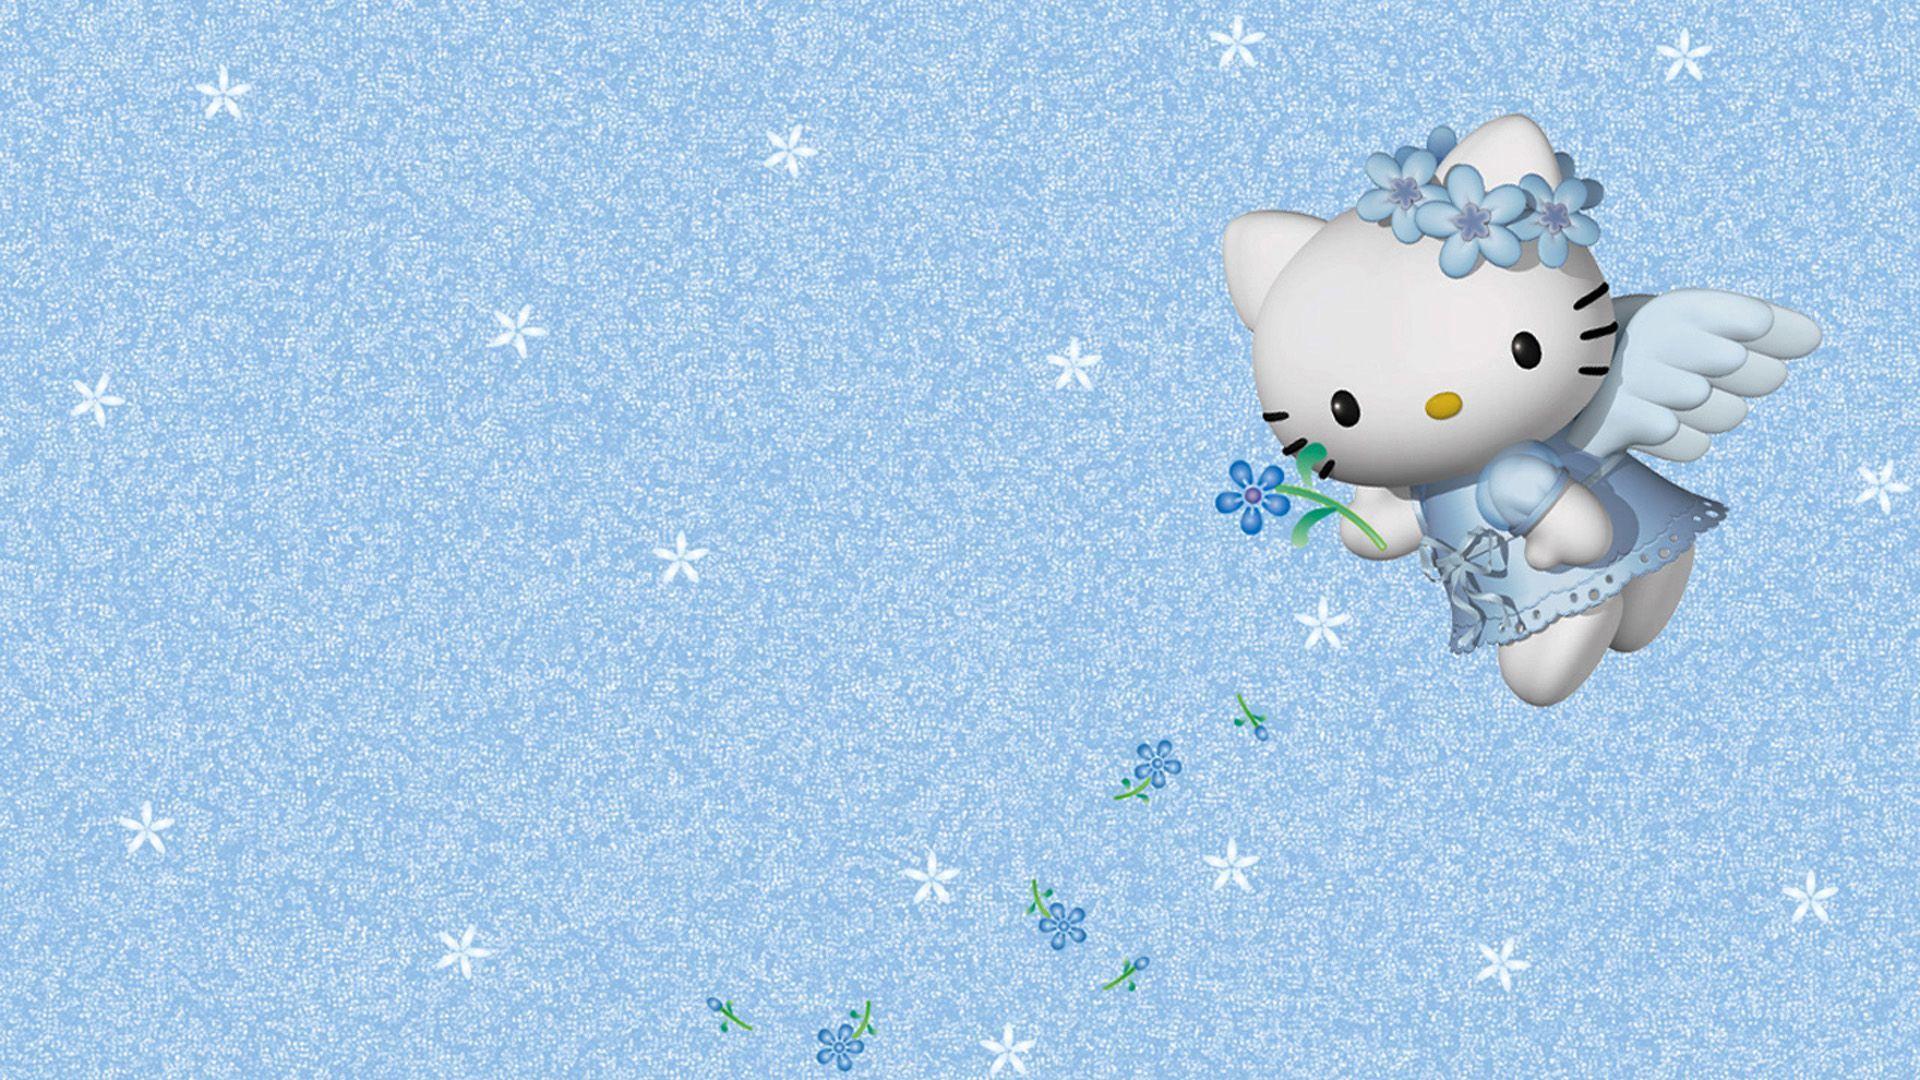 Blue Hello Kitty Wallpapers Top Free Blue Hello Kitty Backgrounds Wallpaperaccess We hope you enjoy our growing collection of hd images to use as a background or home screen for your smartphone or computer. blue hello kitty wallpapers top free